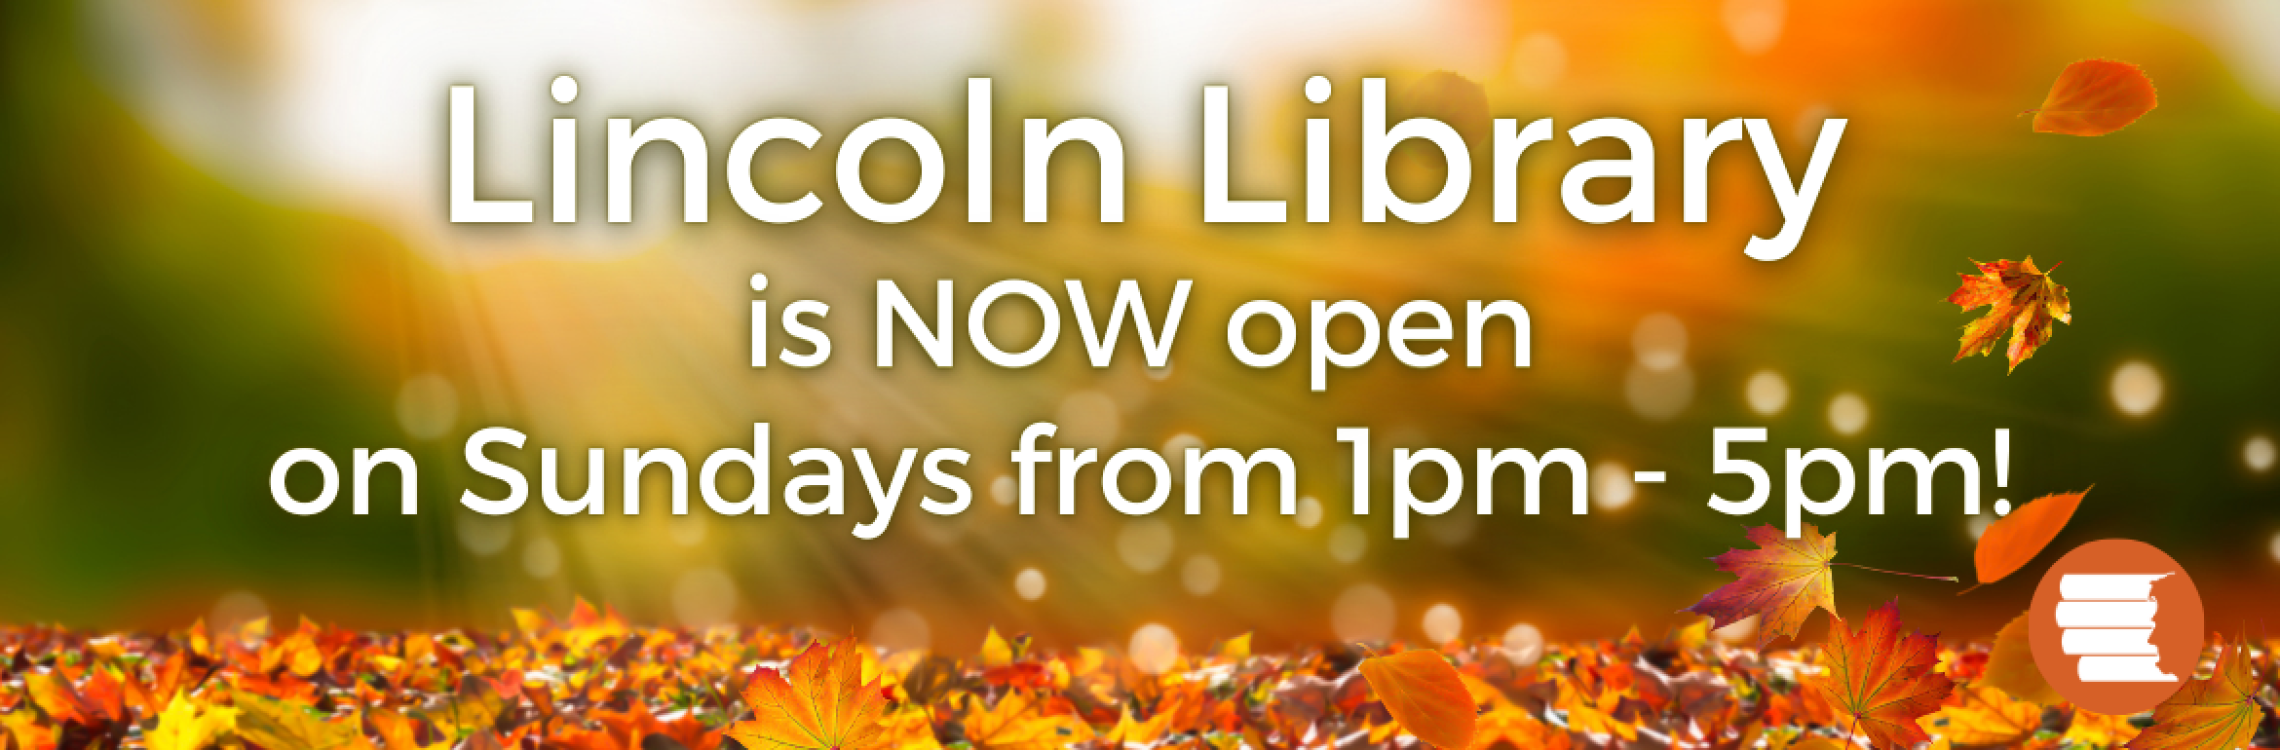 Lincoln Library is now open on Sundays from 1-5pm